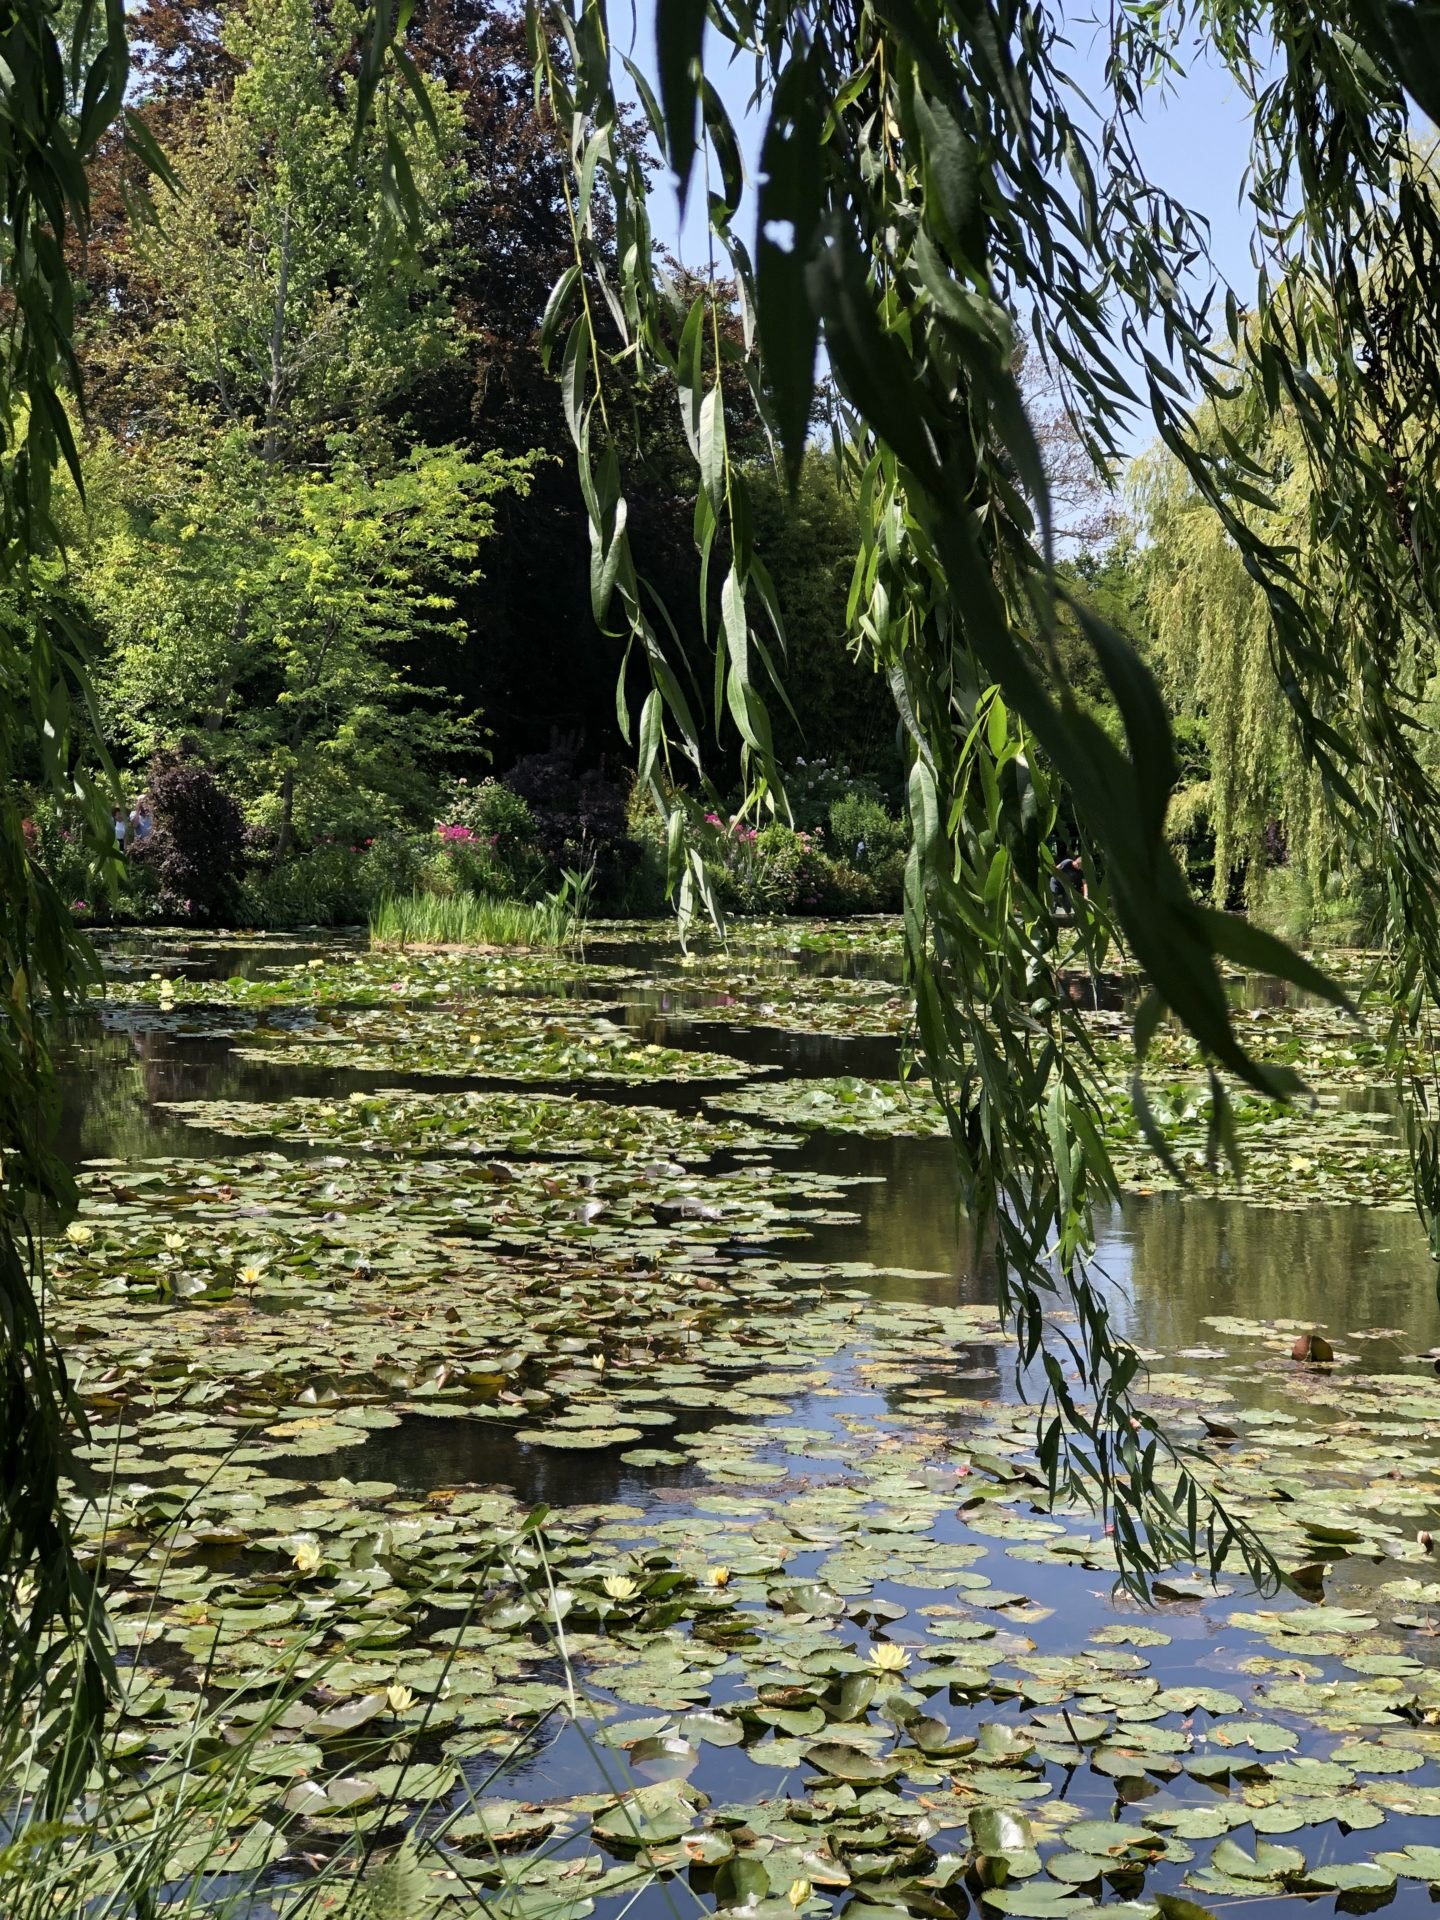 The willow tree that dangles over the pond in Claude Monet's Water lily Garden